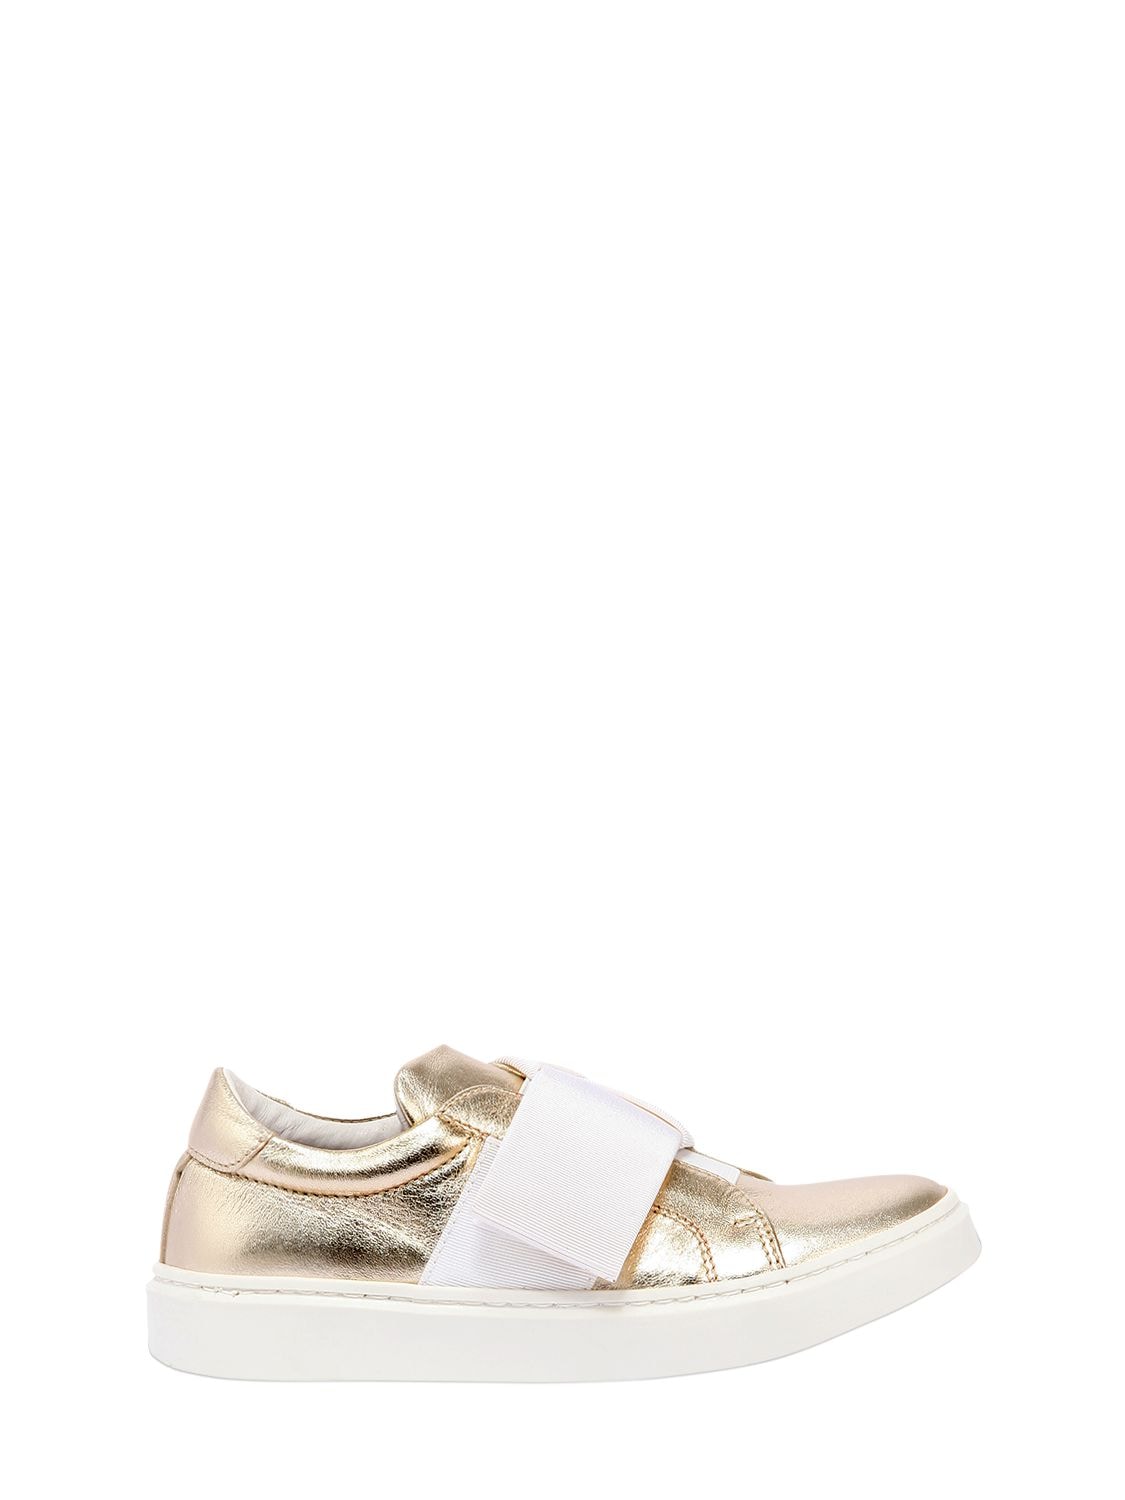 Andrea Montelpare Kids' Metallic Leather Slip-on Sneakers In Gold